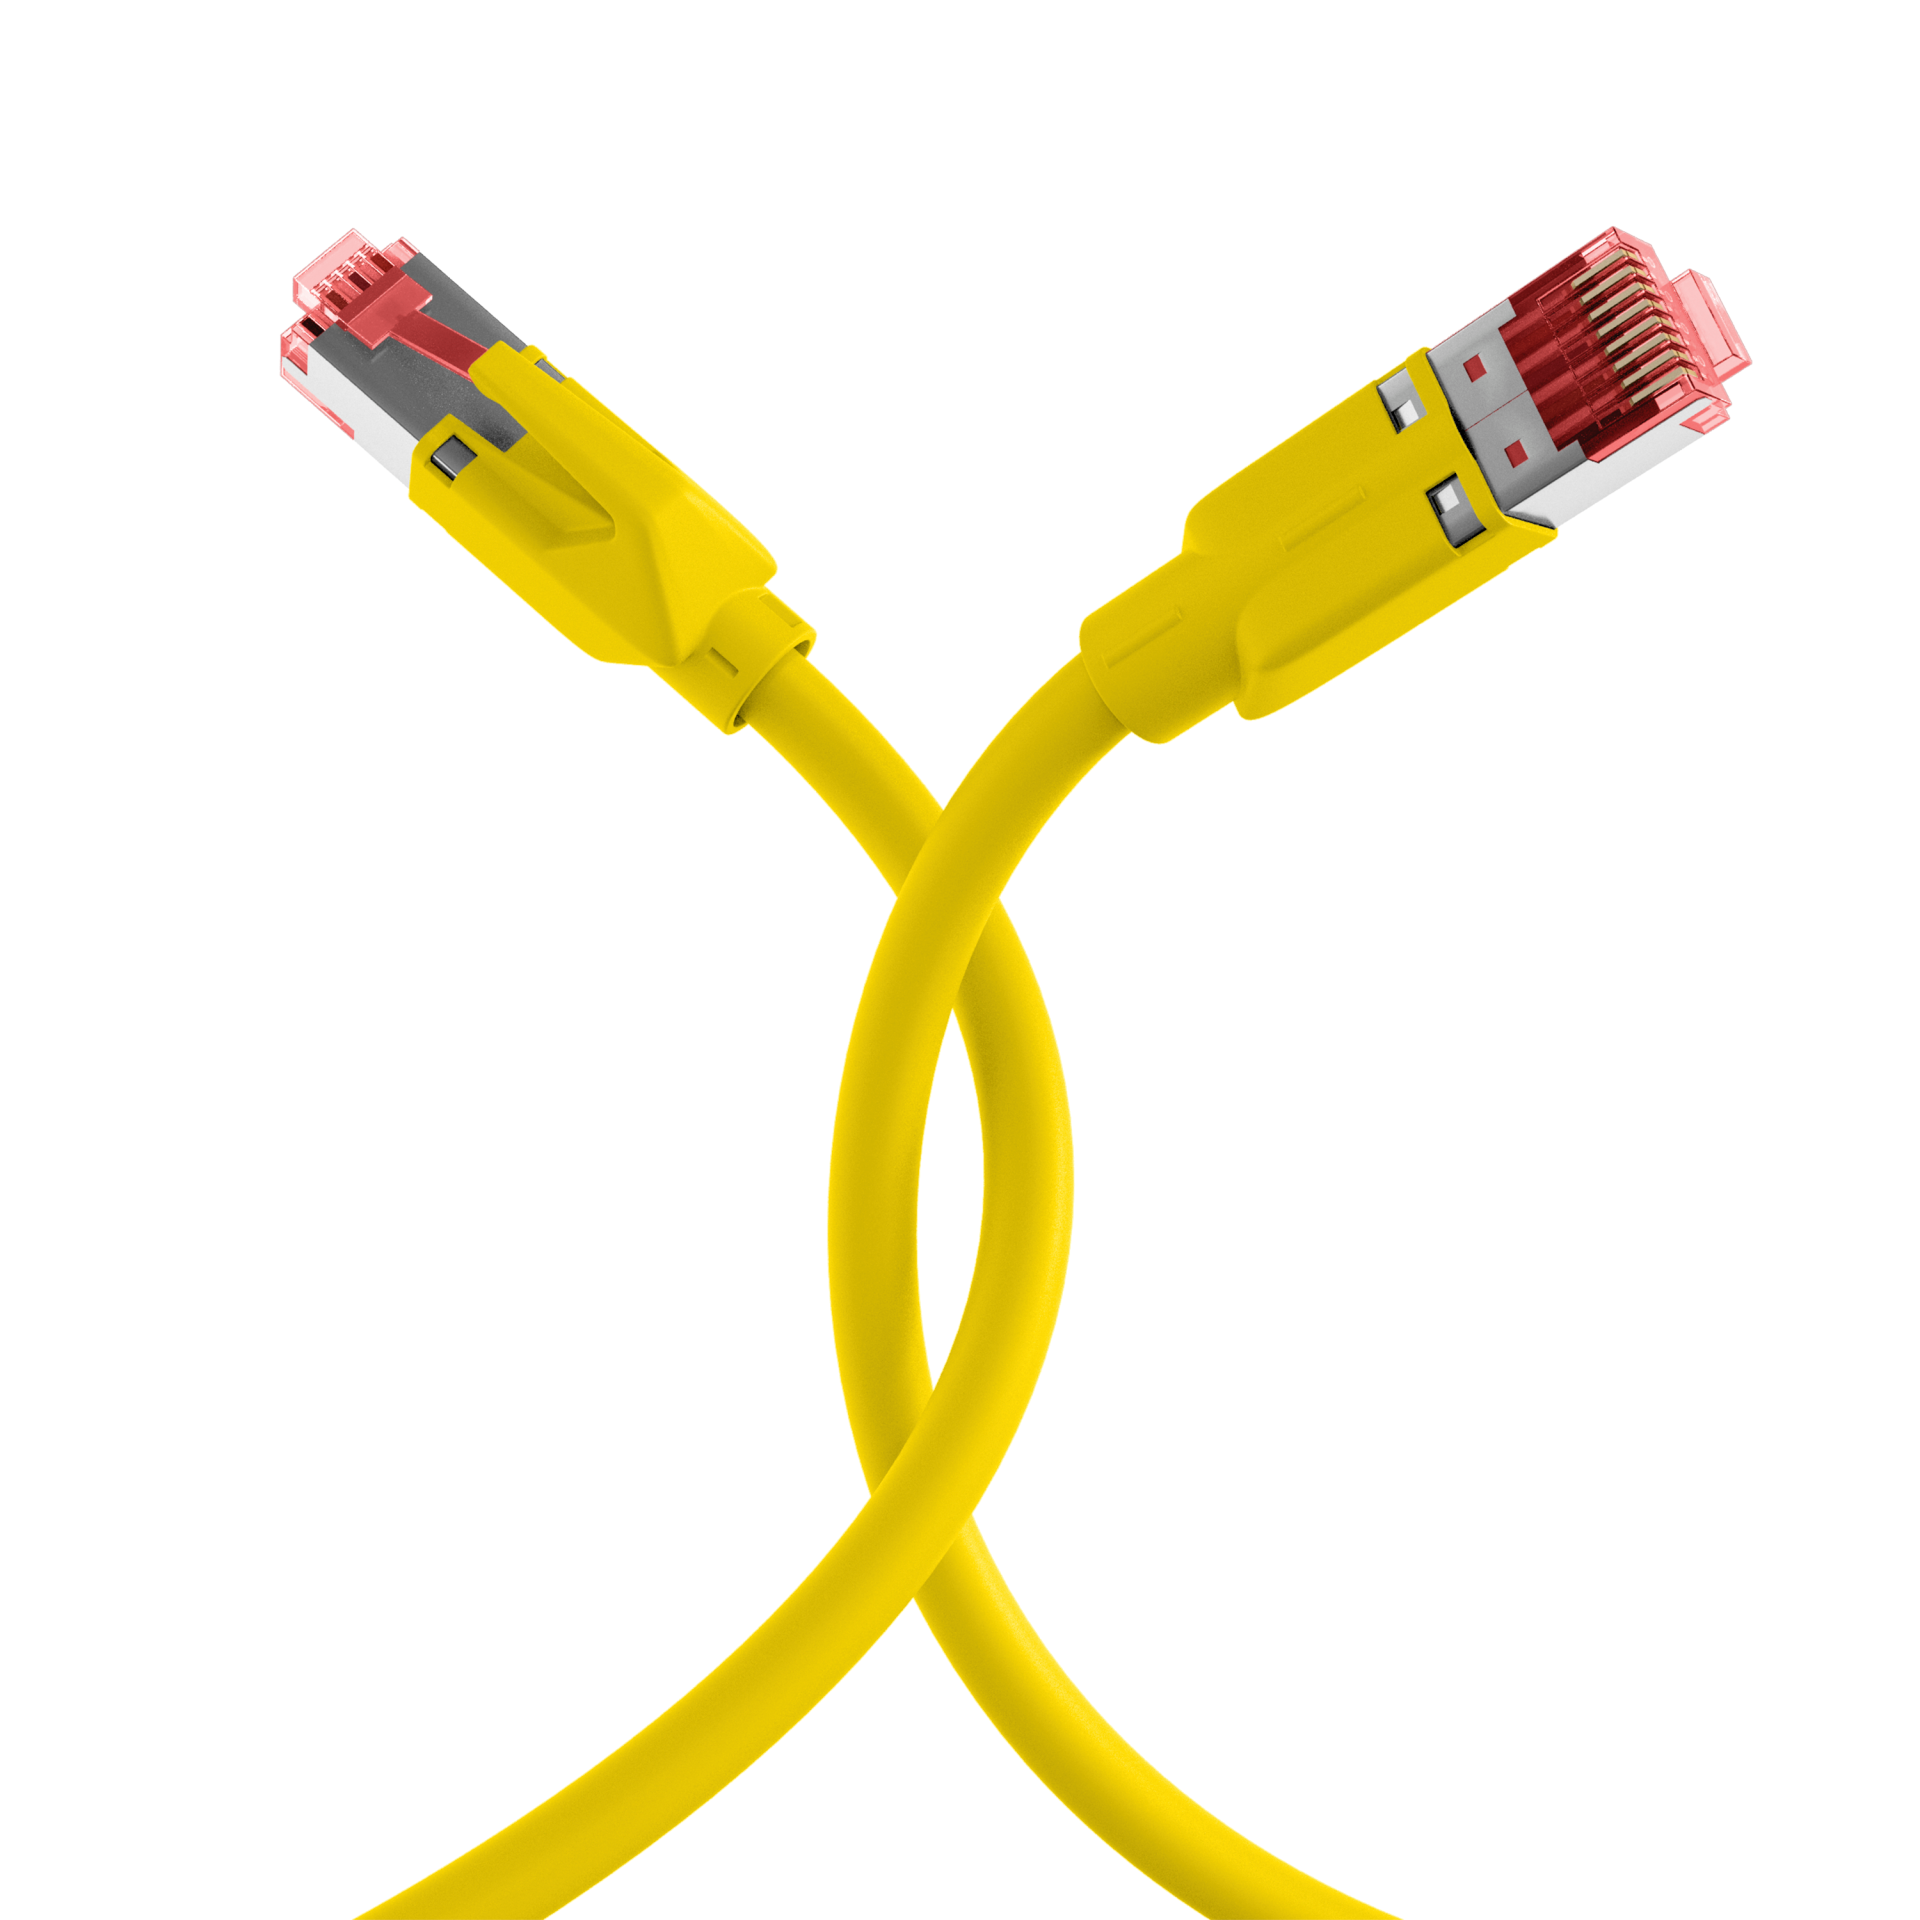 RJ45 Patch Cord Cat.5e SF/UTP PURTM21 for drag chains yellow 8m